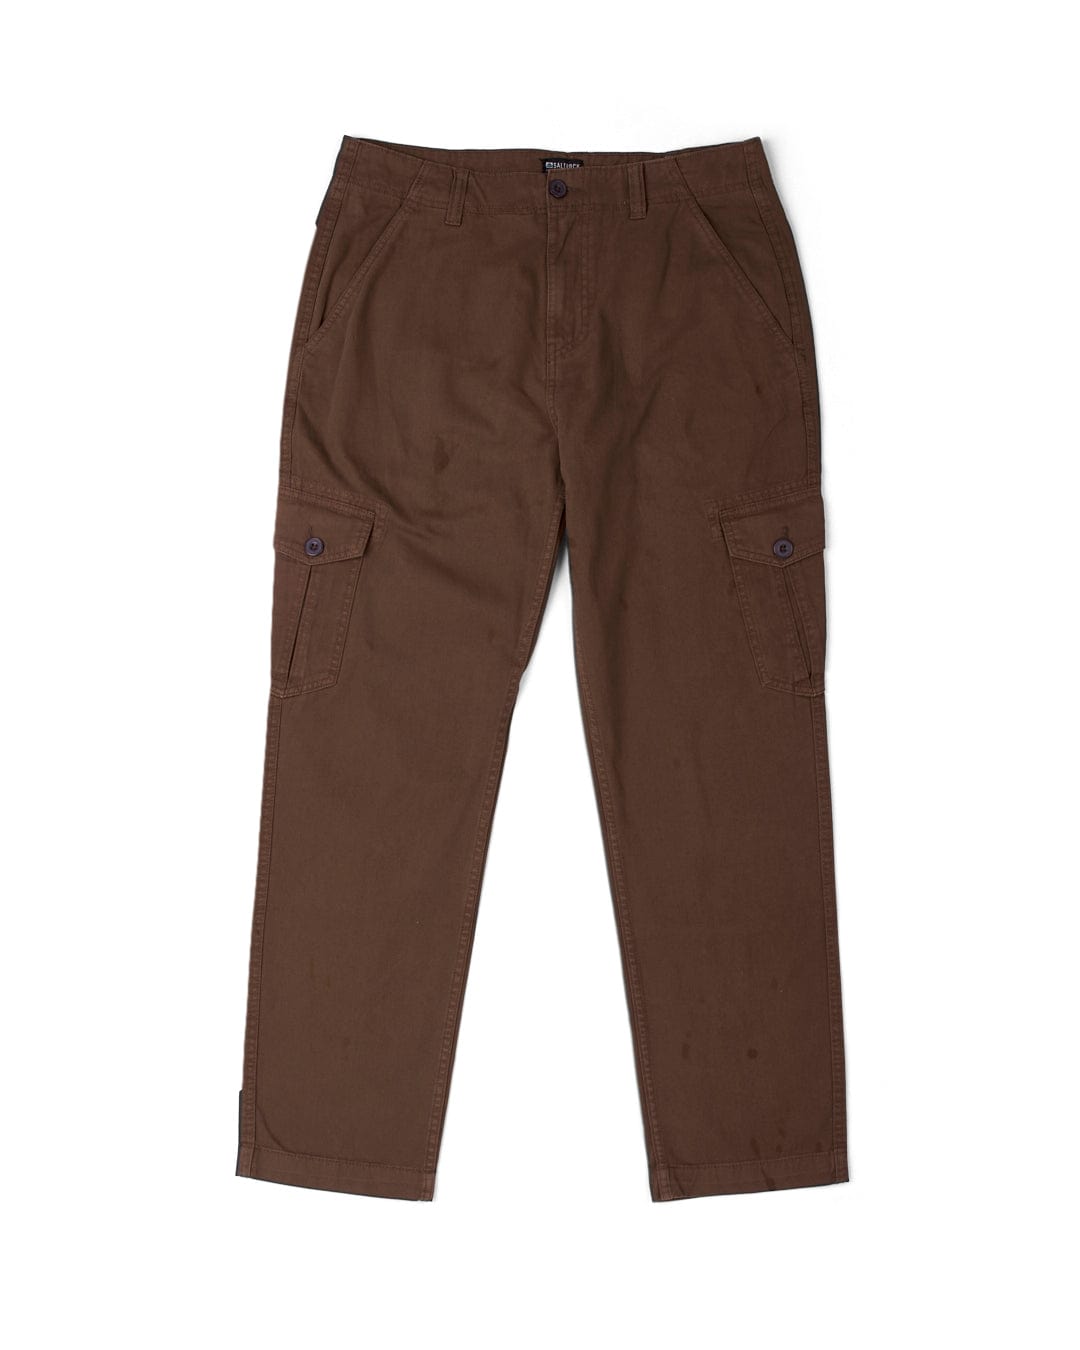 Godrevy 2 - Mens Cargo Trousers - Brown by Saltrock, laid flat on a white background.